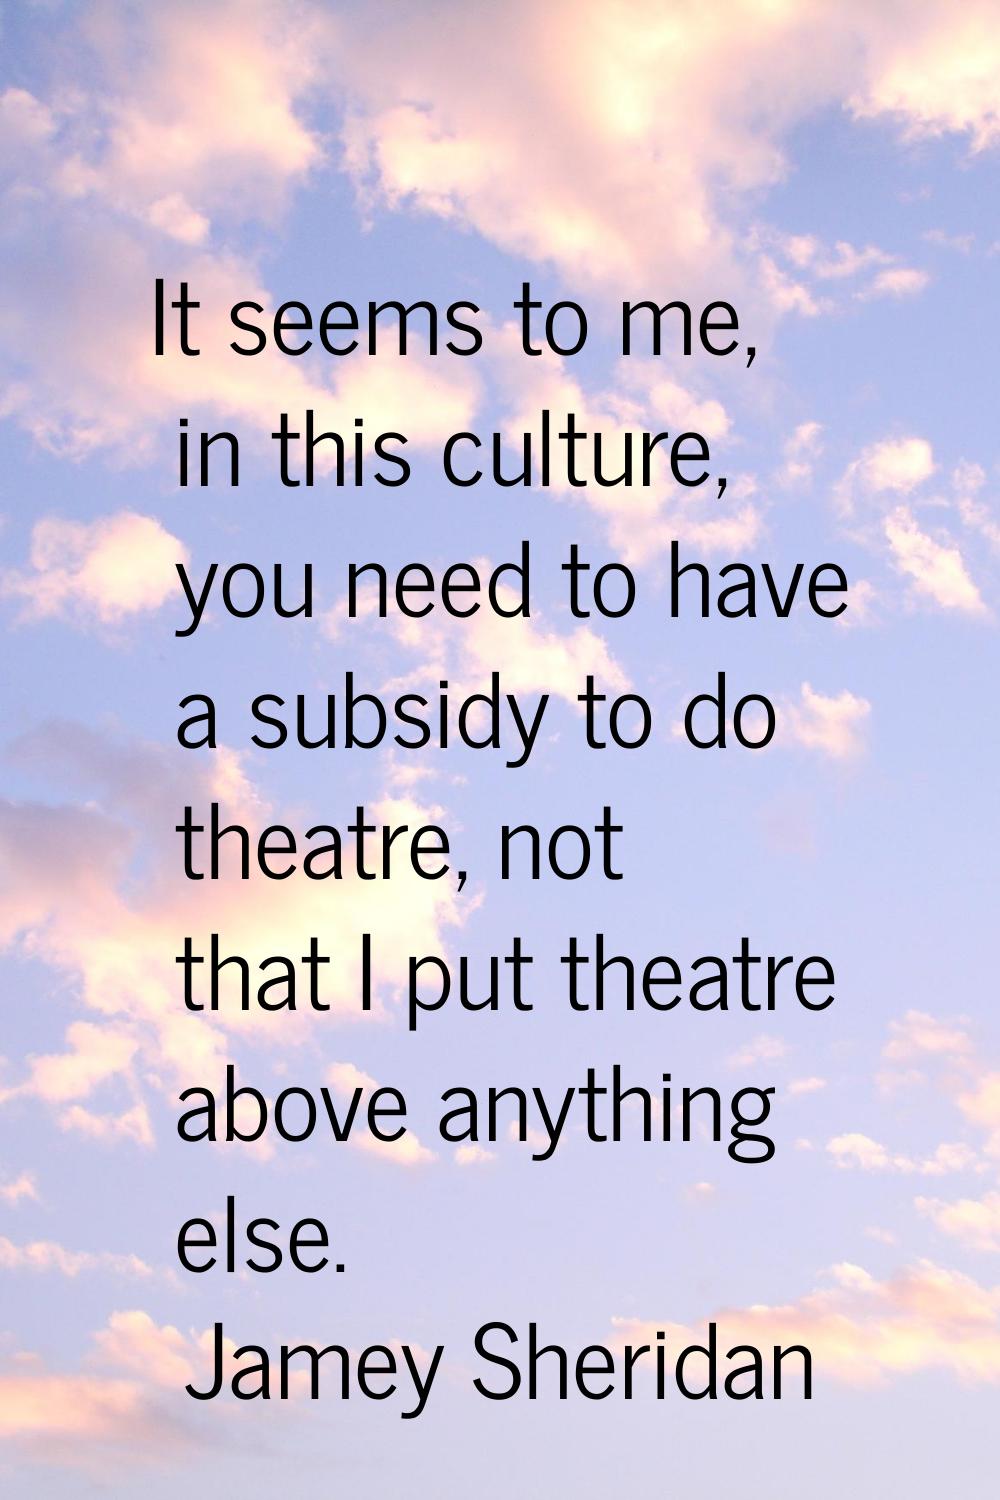 It seems to me, in this culture, you need to have a subsidy to do theatre, not that I put theatre a